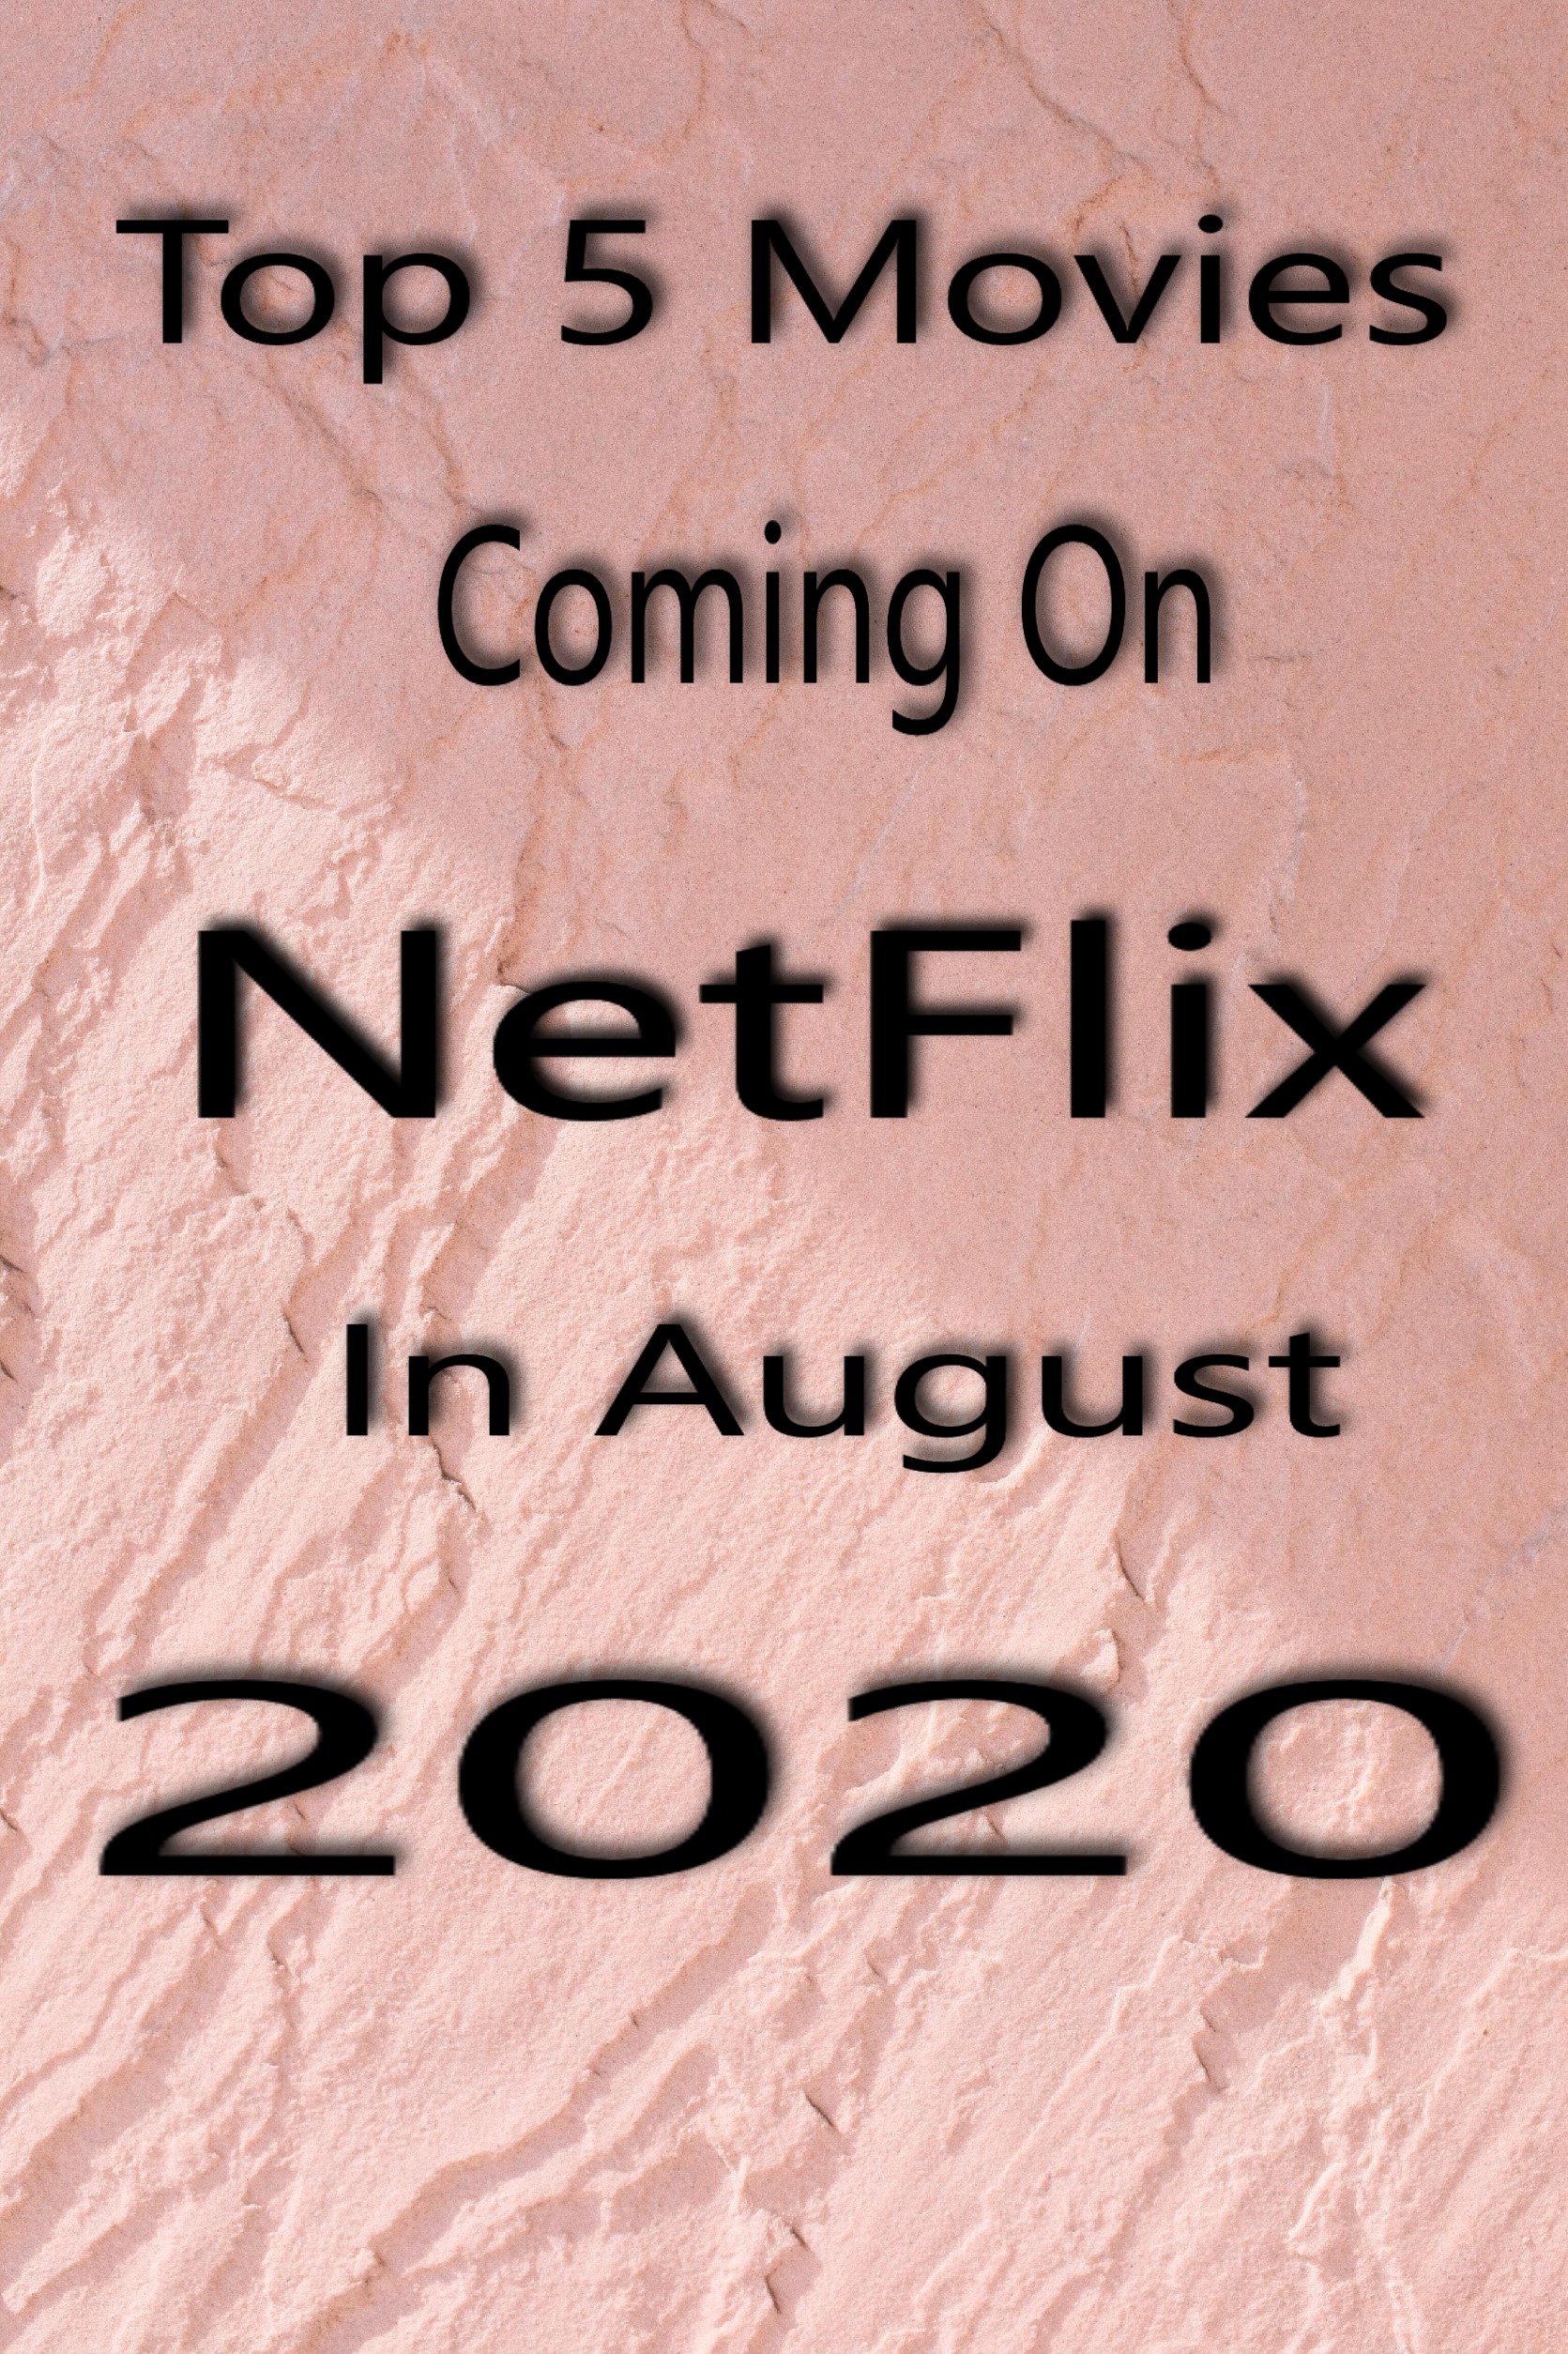 Top 5 Movies Coming On Netflix In August 2020 Top 5 Movies Coming On Netflix In August 2020 Netflix 2020 Netflix 2020 movies Netflix 2020 releases Netflix 2020 may Netflix 2020 best movies Netflix 2020 release dates Netflix 2020 april Netflix 2020 june Netflix 2020 documentaries Netflix 2020 movies list Netflix 2020 horror movies Netflix 2020 movies to watch Netflix 2020 movies release dates Netflix 2020 movies action Netflix 2020 movies comedy Netflix 2020 movies horror Netflix 2020 movies hindi Netflix 2020 movies may Netflix 2020 movies family Netflix 2020 releases list Netflix 2020 releases may Netflix 2020 releases june Netflix 2020 releases april Netflix 2020 releases march Netflix 2020 releases uk Netflix 2020 releases india Netflix 2020 releases nz Netflix 2020 releases canada Netflix 2020 may releases Netflix 2020 mayo Netflix 2020 may canada Netflix may 2020 uk Netflix may 2020 releases list Netflix may 2020 australia Netflix may 2020 new releases Netflix may 2020 coming and going Netflix may 2020 leaving Netflix 2020 best films Netflix canada 2020 best movies Netflix april 2020 best movies Netflix january 2020 best movies Netflix june 2020 best movies Netflix may 2020 best movies Netflix 2020 best horror movies Netflix march 2020 best movies Netflix 2020 best action movies Netflix 2020 release dates canada Netflix series 2020 release dates Netflix originals 2020 release dates Netflix shows 2020 release dates Netflix uk 2020 release dates Netflix january 2020 release dates Netflix original series 2020 release dates Netflix tv series 2020 release dates Netflix 2020 april movies Netflix april 2020 canada Netflix april 2020 releases list Netflix april 2020 uk Netflix april 2020 australia Netflix april 2020 coming and going Netflix april 2020 leaving Netflix april 2020 releases india Netflix april 2020 new releases Netflix 2020 june releases Netflix 2020 june movies Netflix 2020 june canada Netflix 2020 june uk Netflix june 2020 releases list Netflix june 2020 australia Netflix june 2020 coming and going Netflix june 2020 new releases Netflix june 2020 leaving Netflix documentaries 2020 gabriel Netflix documentaries 2020 uk Netflix documentaries 2020 crime Netflix documentaries 2020 little boy Netflix documentaries 2020 drugs Netflix documentaries 2020 coming soon Netflix documentaries 2020 reddit Netflix documentaries 2020 new Netflix documentaries 2020 ireland Netflix movies 2020 list hindi Netflix movies 2020 list action Netflix movies 2020 list romance Netflix movies 2020 list may Netflix movies 2020 list april Netflix original movies 2020 list Netflix new movies 2020 list Netflix comedy movies 2020 list Latest netflix movies 2020 list Netflix 2020 scary movies Netflix june 2020 horror movies Netflix march 2020 horror movies April 2020 netflix horror movies January 2020 netflix horror movies Top 2020 netflix horror movies Netflix horror movies 2020 uk Netflix horror movies 2020 list Netflix movie Netflix movies Netflix movies list Netflix movies 2020 Netflix movies hindi Netflix movies 2019 Netflix movies to watch Netflix movies download Netflix movies telugu Netflix movies india Netflix movies tamil Netflix movie list Netflix movie download Netflix movie list hindi Netflix movie 2020 Netflix movie download free Netflix movie extraction Netflix movie hindi Netflix movie suggestions Netflix movie to watch Netflix movie list 2020 Netflix movies list hindi Netflix movies list 2020 Netflix movies list bollywood Netflix movies list tamil Netflix movies list telugu Netflix movies list 2019 Netflix movies list hollywood Netflix movies list india Netflix movies list hindi 2020 Netflix movies 2020 hindi Netflix movies 2020 hollywood Netflix movies 2020 list Netflix movies 2020 bollywood Netflix movies 2020 telugu Netflix movies 2020 download Netflix movies 2020 india Netflix movies 2020 english Netflix movies 2020 tamil Netflix movies hindi list Netflix movies hindi dubbed Netflix movies hindi 2020 Netflix movies hindi dubbed download Netflix movies hindi latest Netflix movies hindi comedy Netflix movies hindi new Netflix movies hindi 2019 Netflix movies hindi series Netflix movies 2019 hindi Netflix movies 2019 list Netflix movies 2019 bollywood Netflix movies 2019 hollywood Netflix movies 2019 india Netflix movies 2019 telugu Netflix movies 2019 romance Netflix movies 2019 english Netflix movies 2019 tamil Netflix movies to watch with family Netflix movies to watch india Netflix movies to watch with friends Netflix movies to watch 2020 Netflix movies to watch hindi Netflix movies to watch with girlfriend Netflix movies to watch thriller Netflix movies to watch for teens Netflix movies to watch with parents Netflix movies download free Netflix movies download free website Netflix movies download site Netflix movies download free hindi Netflix movies download website Netflix movies download telegram channel Netflix movies download in hindi dubbed Netflix movies download in hindi Netflix movies download free sites Netflix movies telugu 2020 Netflix movies telugu list Netflix movies telugu download Netflix movies telugu latest Netflix movies telugu web series Netflix movies telugu 2018 Netflix movies telugu oh baby Netflix telugu movies streaming list Netflix telugu movies list 2020 Netflix movies indian Netflix movies india 2020 Netflix movies india list Netflix movies india english Netflix movies indian 2020 Netflix movies indian list Netflix movies india 2019 Netflix movies indian 2019 Netflix movies india april 2020 Netflix movies tamil dubbed Netflix movies tamil dubbed download Netflix movies tamil download Netflix movies tamil 2019 Netflix movies tamil online Netflix movies tamilyogi Netflix movie list bollywood Netflix movie list tamil Netflix movie list hindi dubbed Netflix movie list telugu Netflix movie list hindi 2020 Netflix movie list english Netflix movie list malayalam Netflix movie download website Netflix movie download app Netflix movie download telegram Netflix movie download in hindi filmyzilla Netflix movie downloader online Netflix movie download sites Netflix movie downloader apk Netflix movie download in tamil Netflix movie list hindi 2019 Netflix movie list hindi download Netflix movie list hindi 2018 Netflix india movies list hindi Netflix original movies list hindi Comedy netflix movie list hindi Netflix all movies list hindi Netflix movie 2020 may Netflix movie download free website Netflix movie free download online Netflix movie free download in hindi Netflix movie free download app Guilty netflix movie download free Drive netflix movie download free Netflix movie player download free Netflix full movie download free Extraction netflix movie download free Netflix movie extraction download Netflix movie extraction cast Netflix movie extraction release date and time Netflix movie extraction free download Netflix movie extraction release date Netflix movie extraction release time Netflix movie extraction in hindi Netflix movie extraction full movie Netflix movie extraction download in hindi Netflix movie hindi dubbed Netflix movie hindi 2020 Netflix movie hindi download Netflix movie hindi list Netflix movie hindi latest Netflix movie hindi 2019 Netflix movie suggestions 2020 Netflix movie suggestions romance Netflix movie suggestions comedy Netflix movie suggestions india Netflix movie suggestions romantic comedy Netflix movie suggestions thriller Netflix movie suggestions canada Netflix movie suggestions australia Netflix movie suggestions for 12 year olds Netflix movie to watch with family Netflix movie to watch 2020 Netflix movie to watch with girlfriend Netflix movie to watch with friends Netflix movie to watch with boyfriend Netflix movie to watch with parents Netflix movie to watch in lockdown Netflix movie to watch with your boyfriend Netflix movie to watch when high Netflix movie list 2020 bollywood Netflix movie list 2020 may Netflix movie list 2020 comedy Netflix films list 2020 Netflix movie list april 2020 Netflix movie list january 2020 Netflix movie list march 2020 Netflix canada movie list 2020 Netflix movie list june 2020